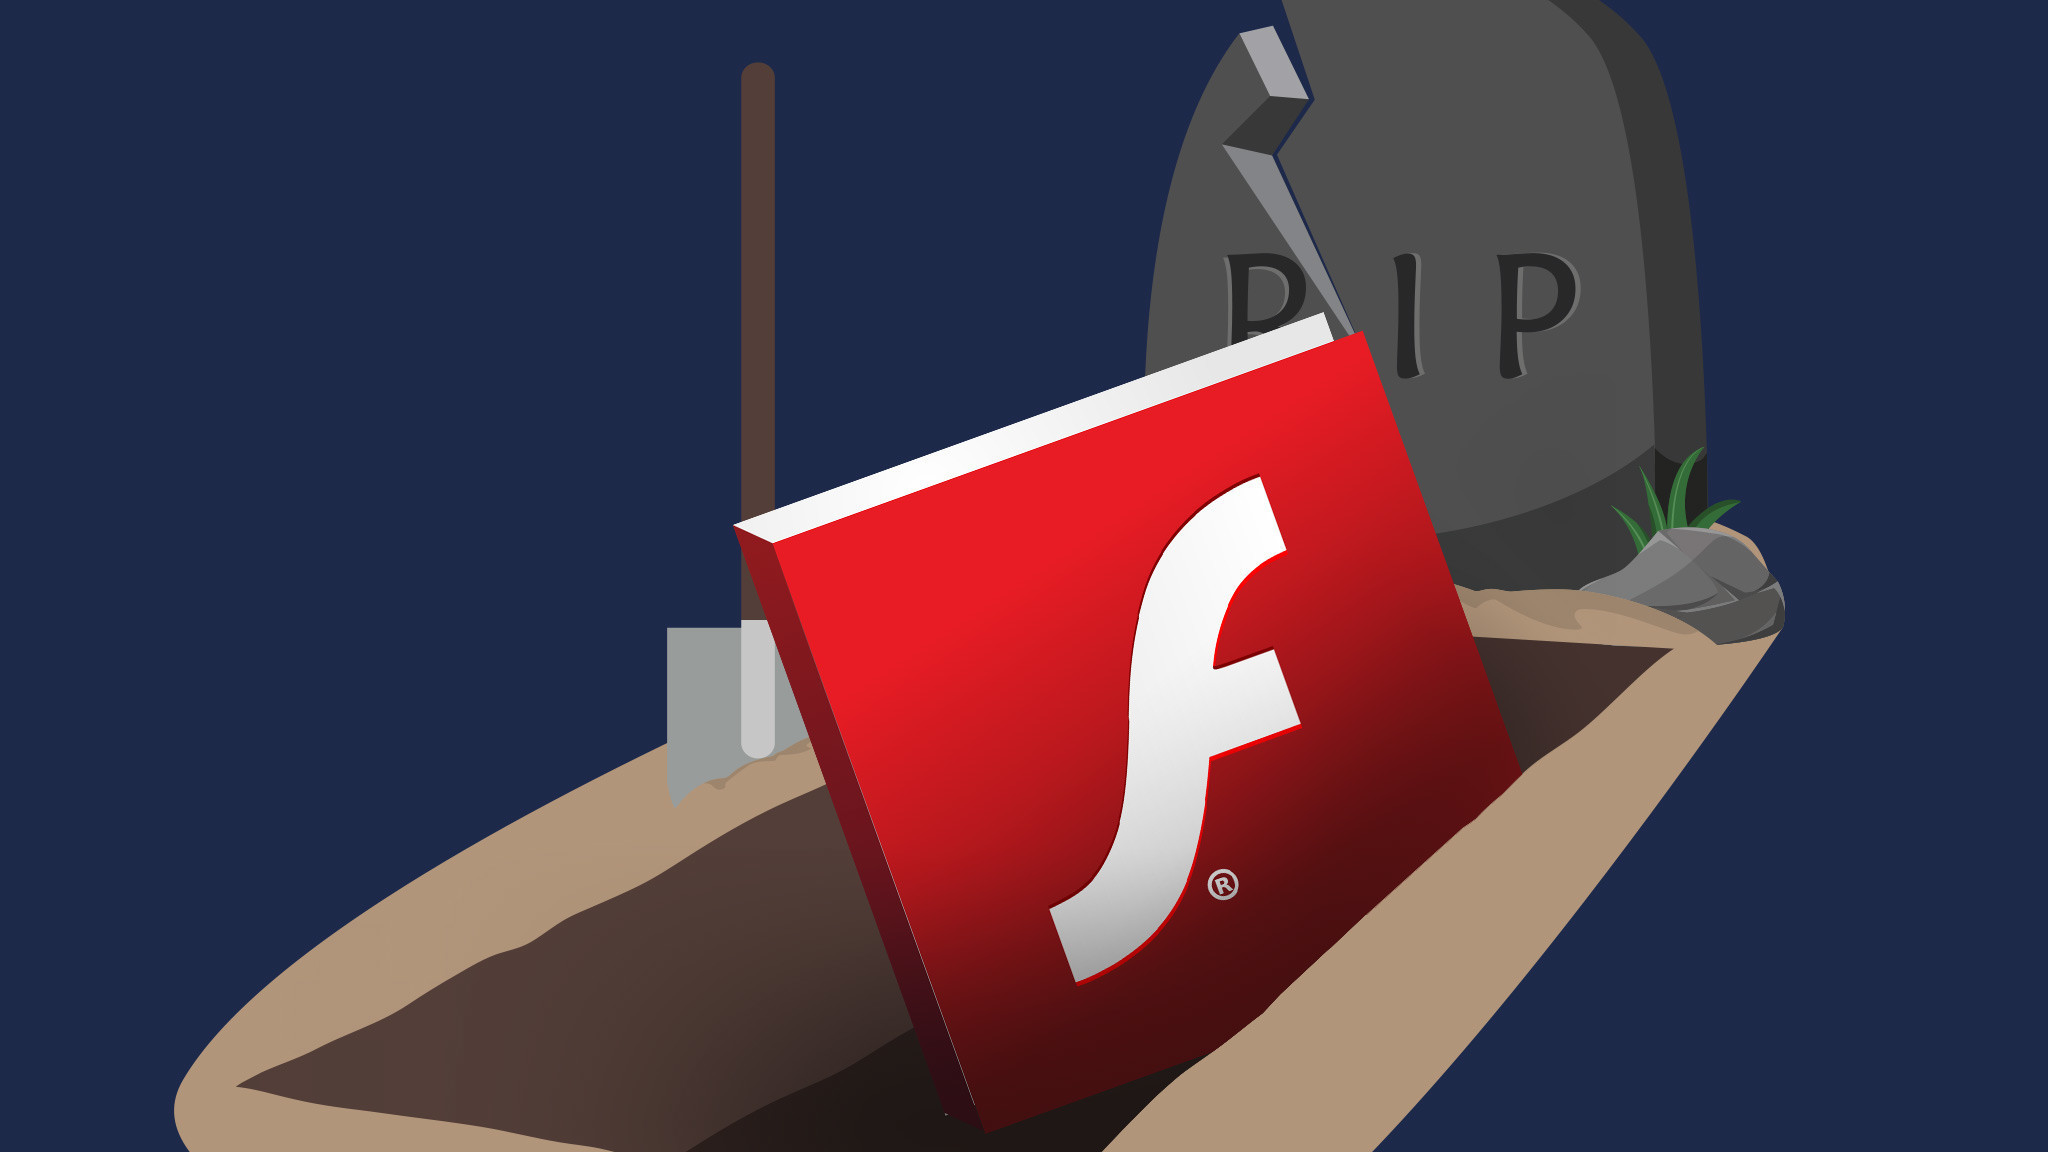 download latest version adobe flash player for firefox